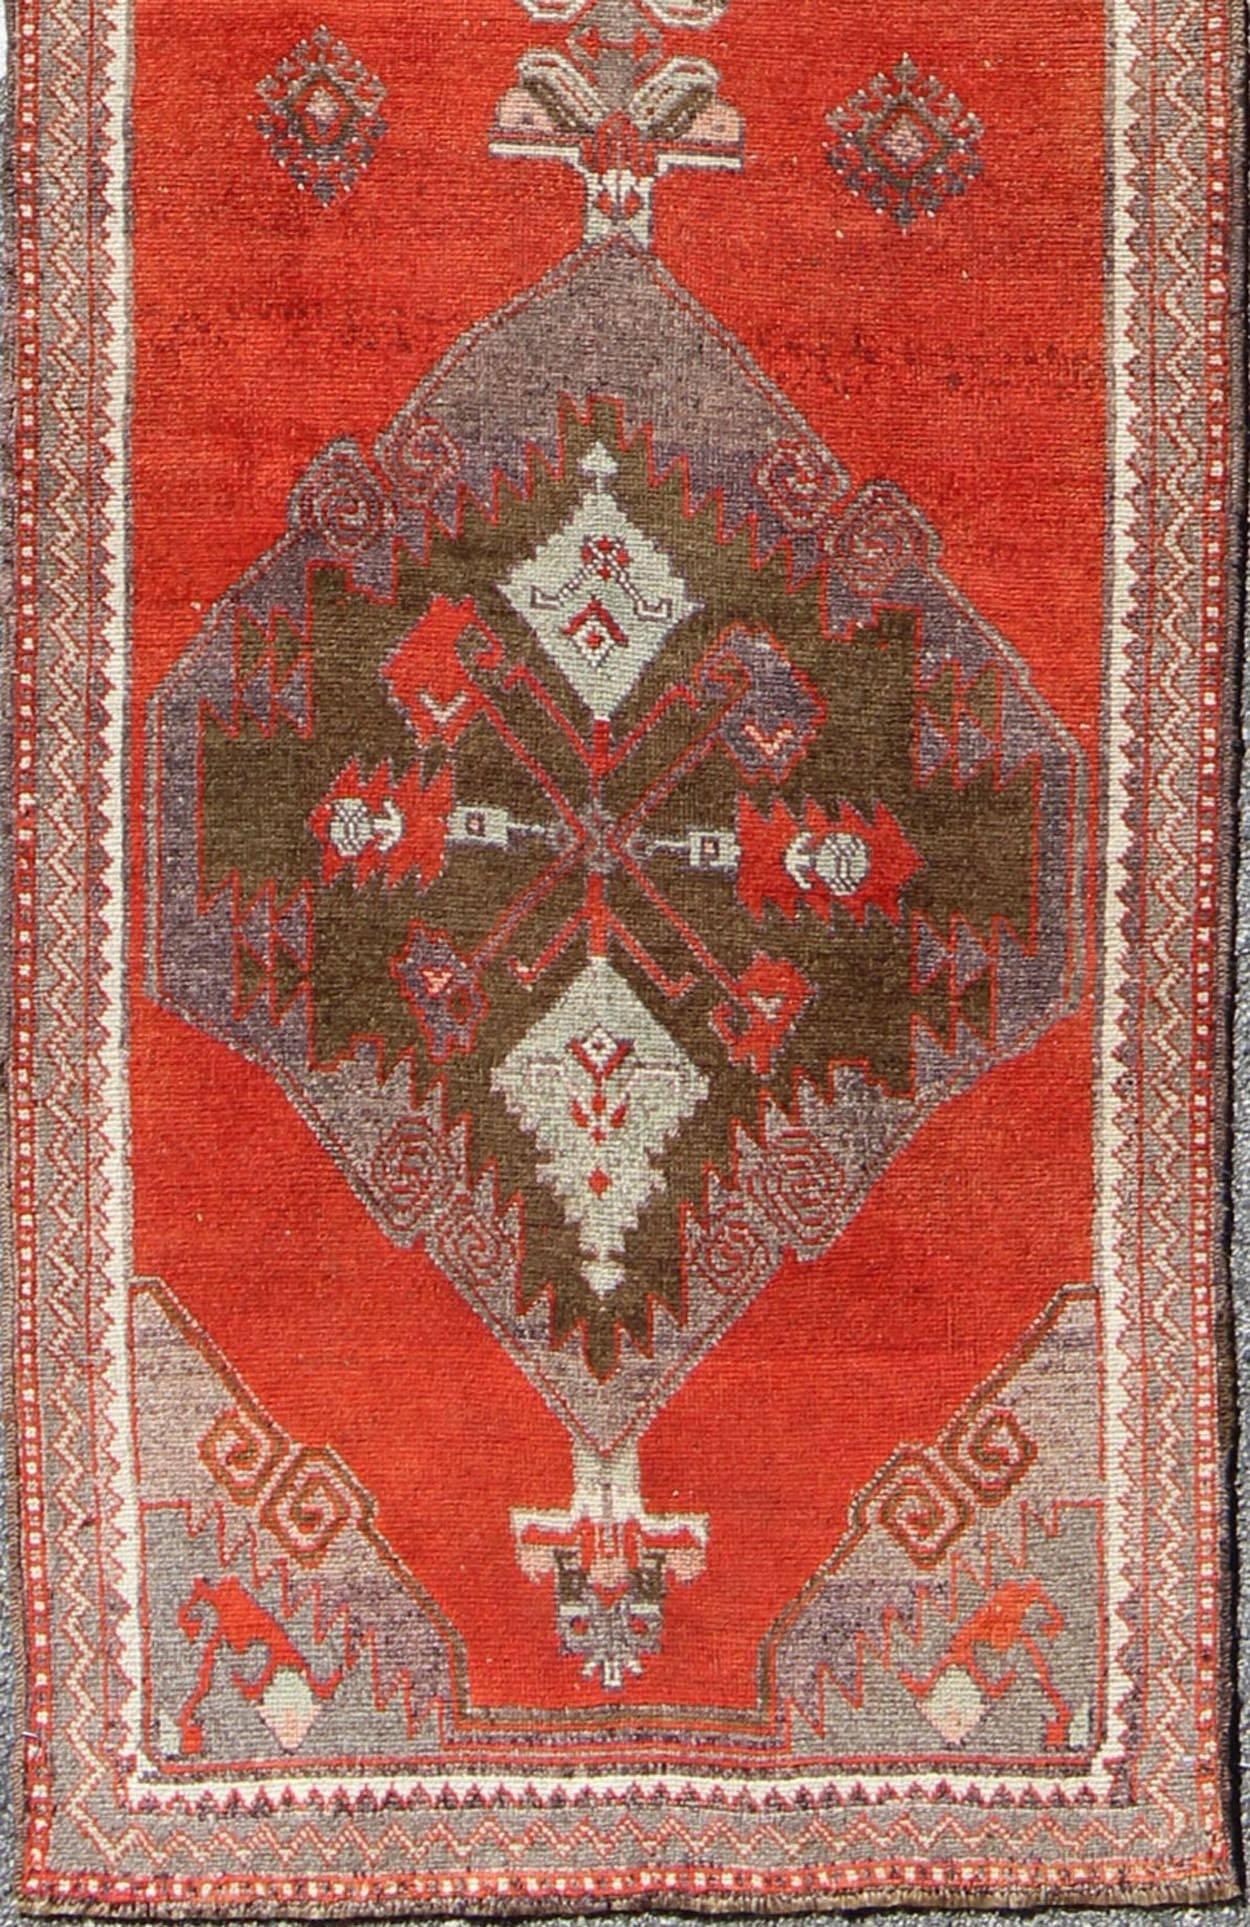 Red and brown Vintage Turkish Oushak runner with three Medallion Design, rug tu-vey-95060, country of origin / type: Turkey / Oushak, circa 1930

This beautiful vintage Oushak runner from 1930s Turkey features a Classic Oushak design, which is